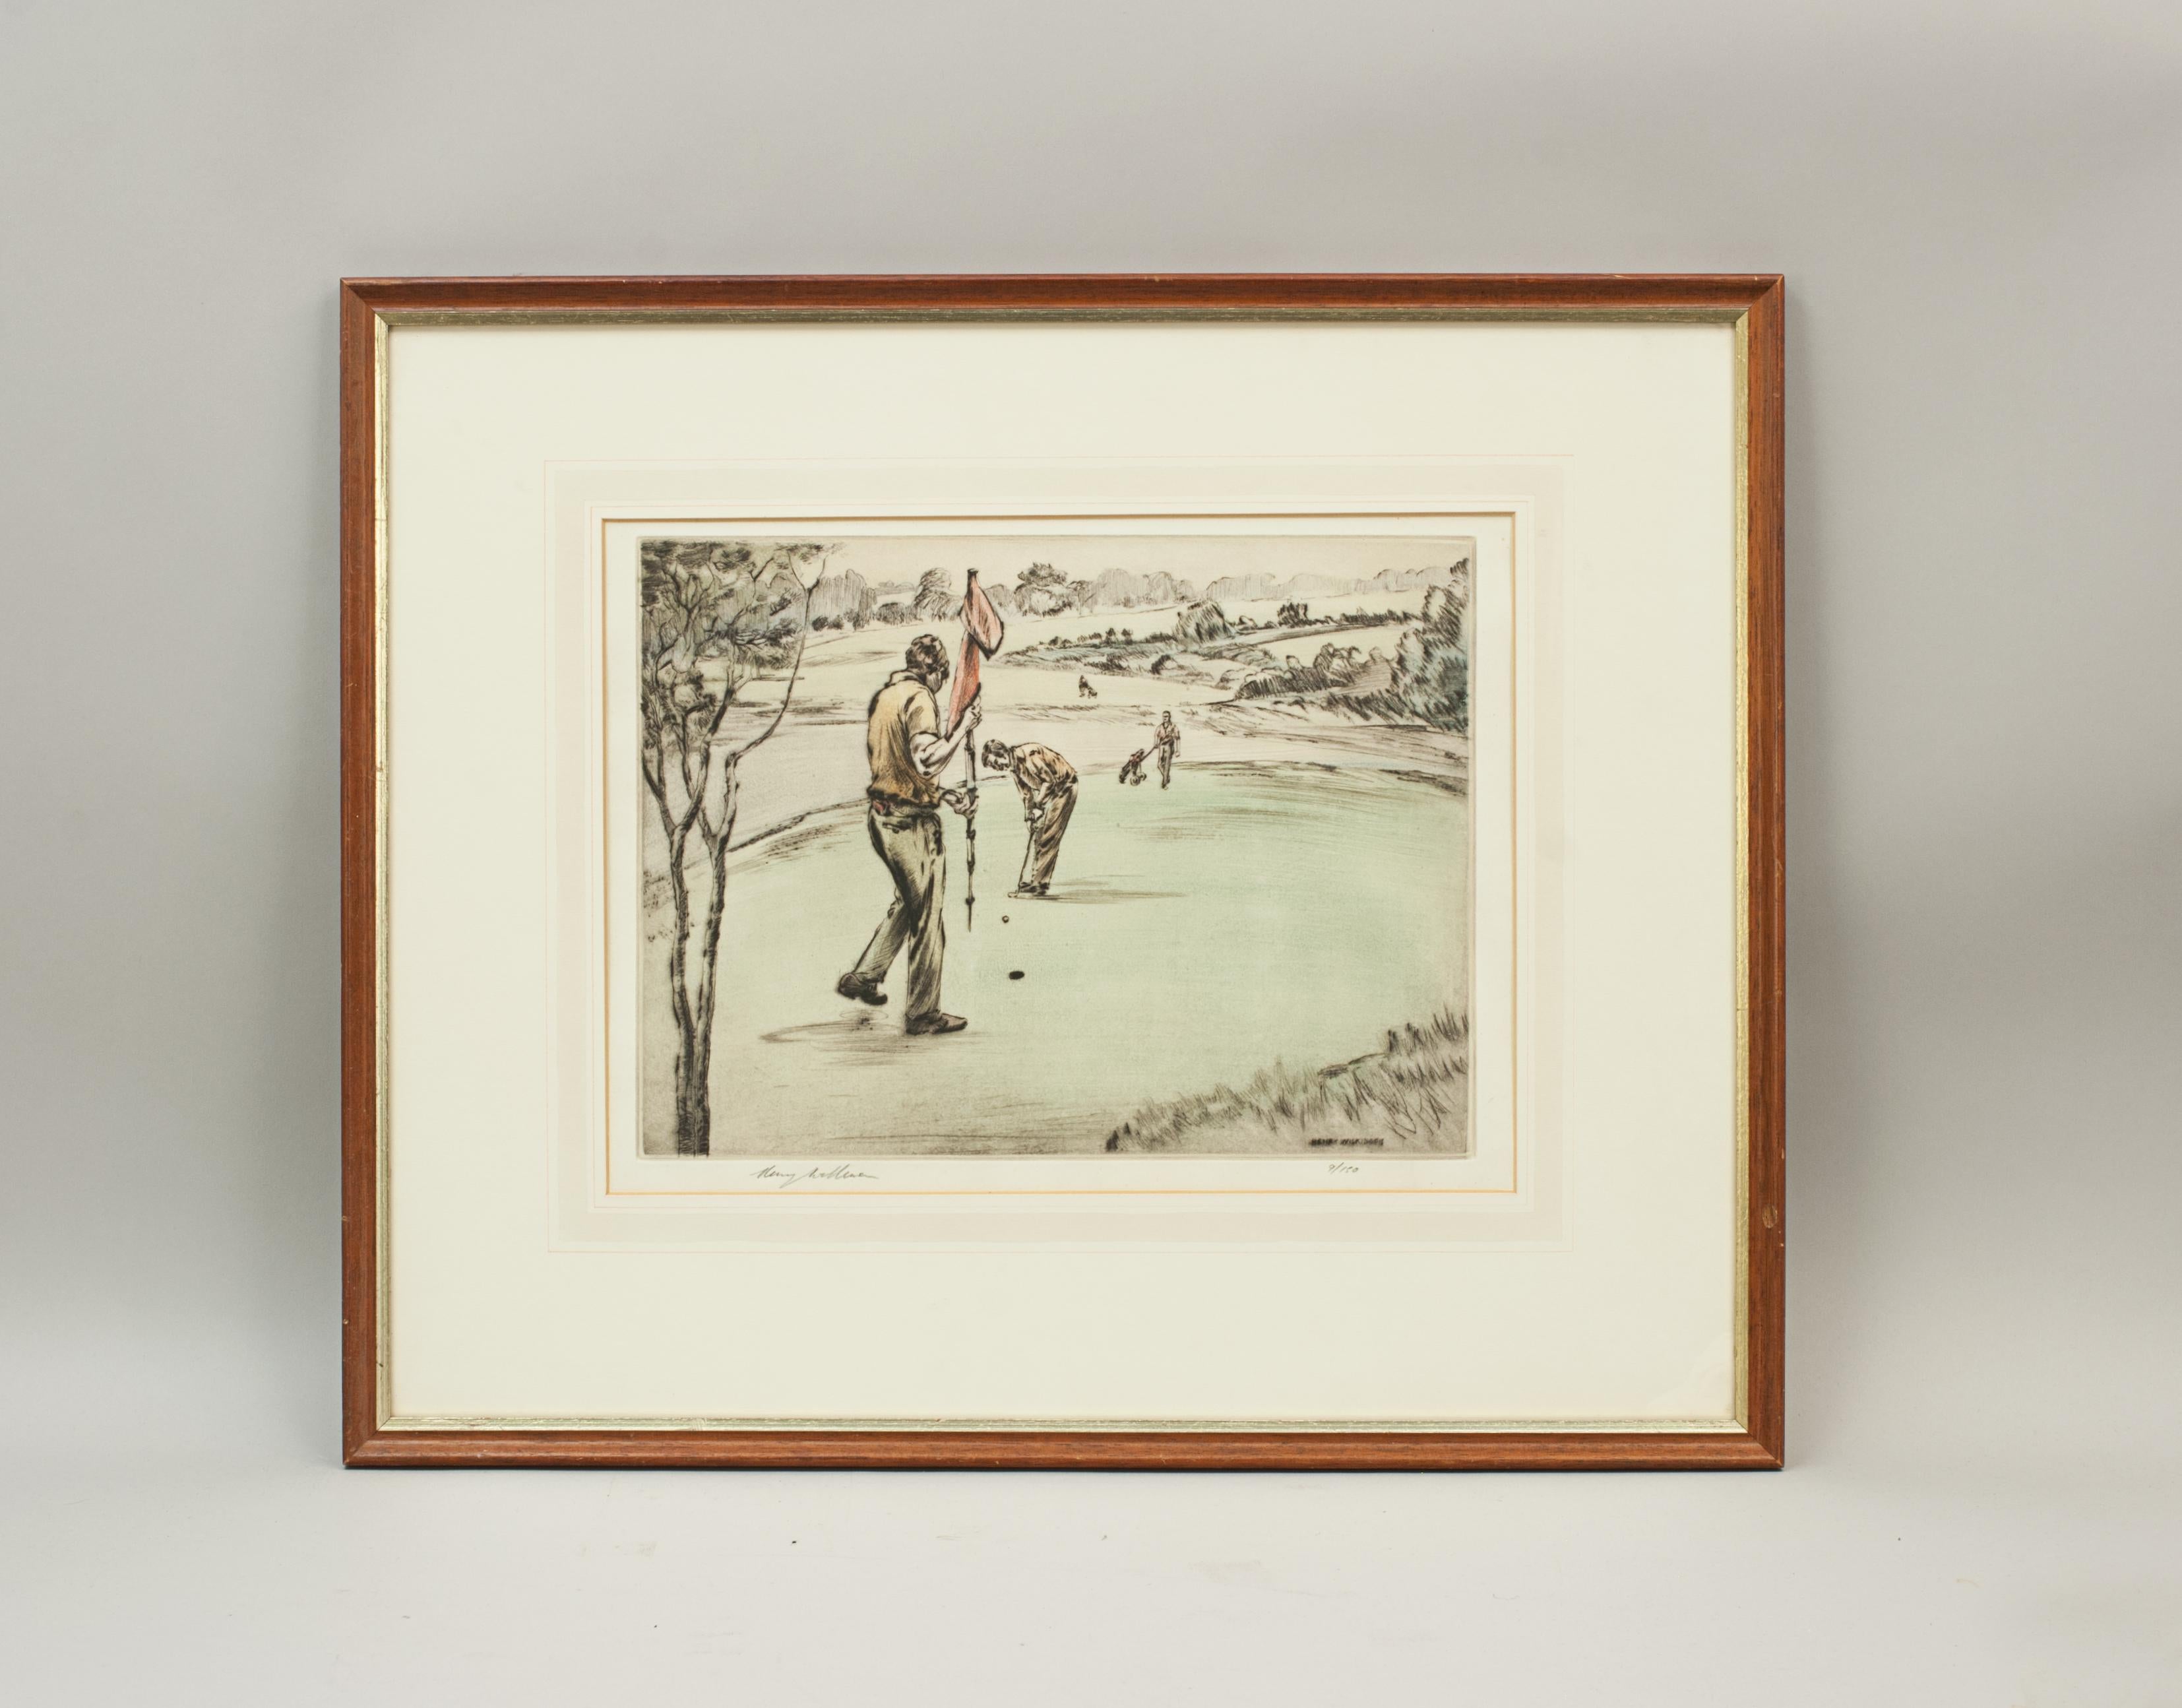 Limited Edition Wilkinson Golf Picture.
A good colourful drypoint etching by Henry Wilkinson showing a gentleman putting and his partner manning the flag. Two more golfers with trolleys can be seen in the background. Numbered 9 of a run of 150 and